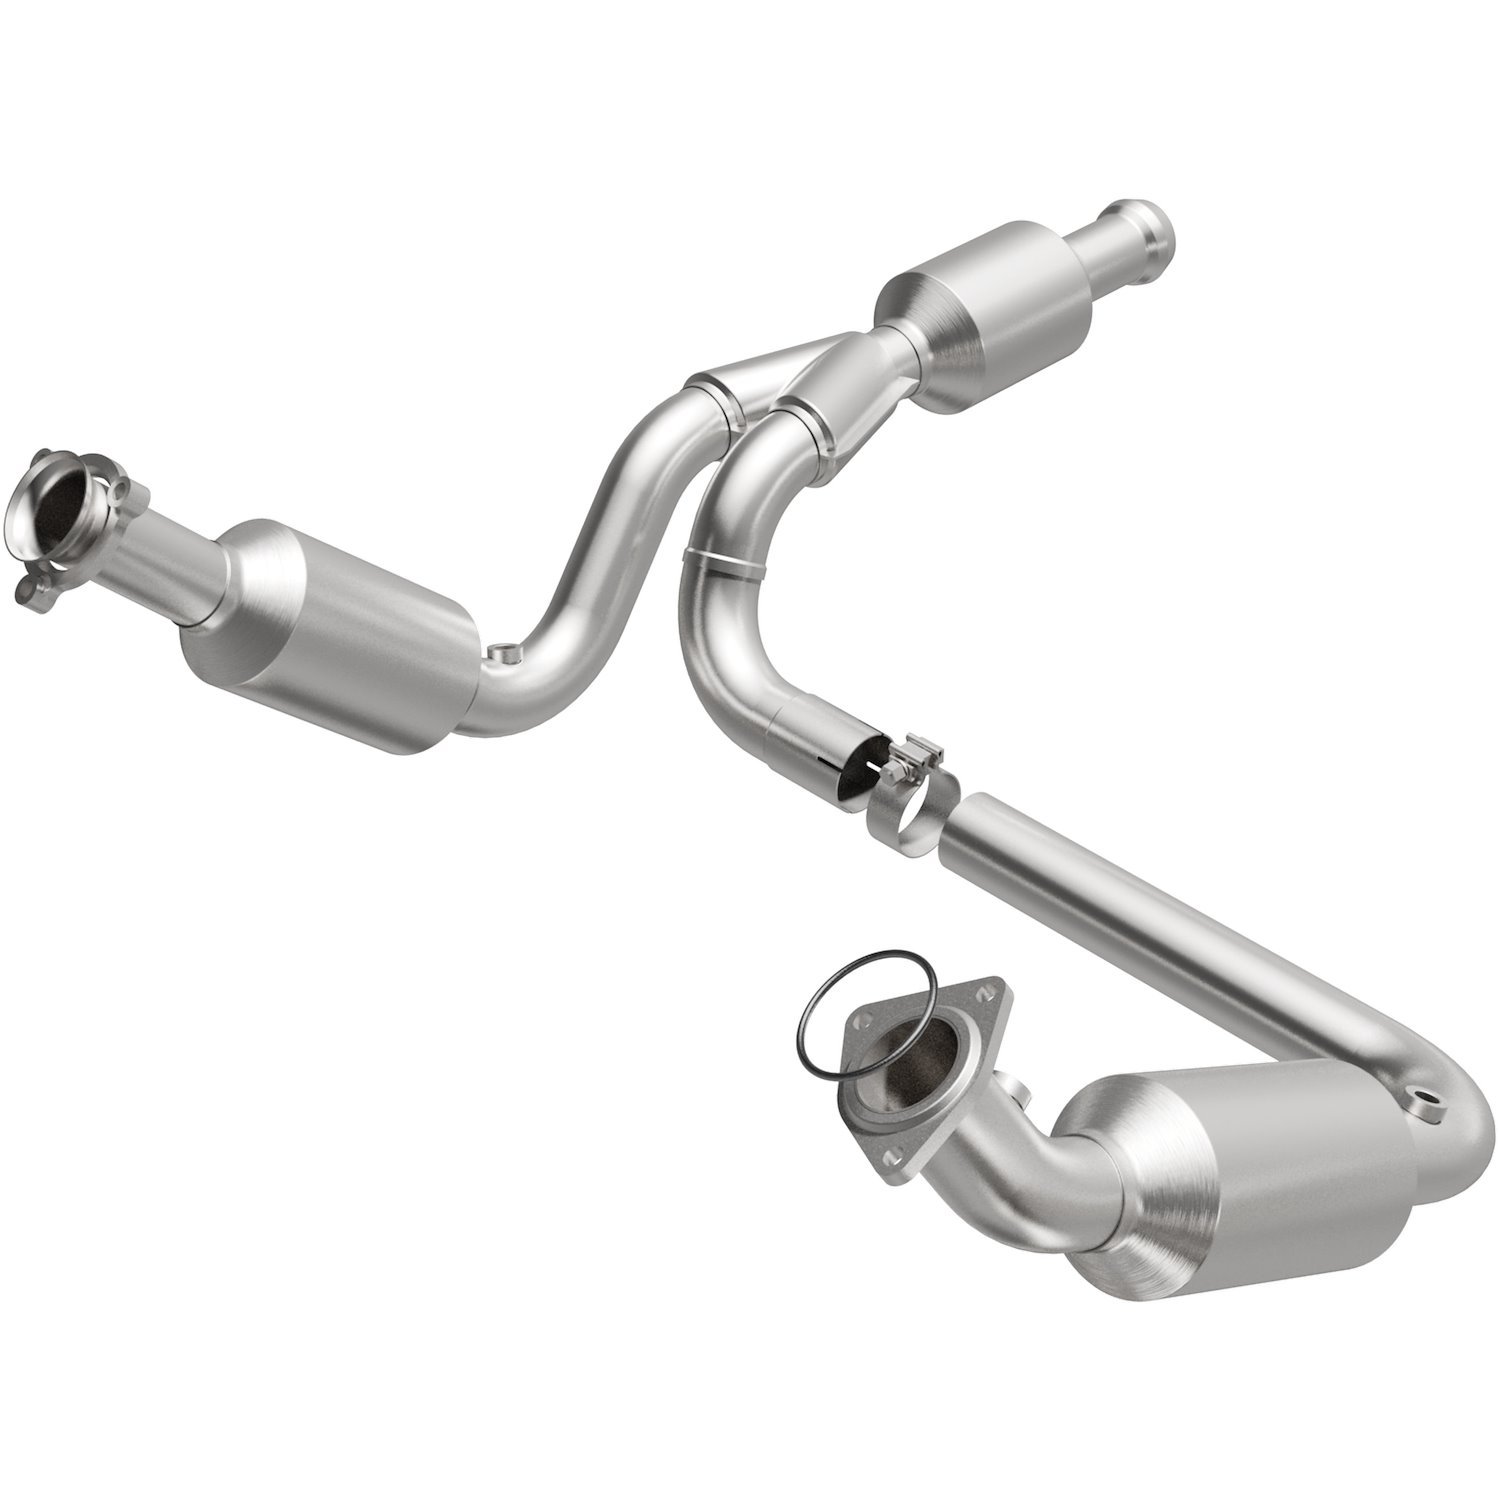 California Grade CARB Compliant Direct-Fit Catalytic Converter 5582578